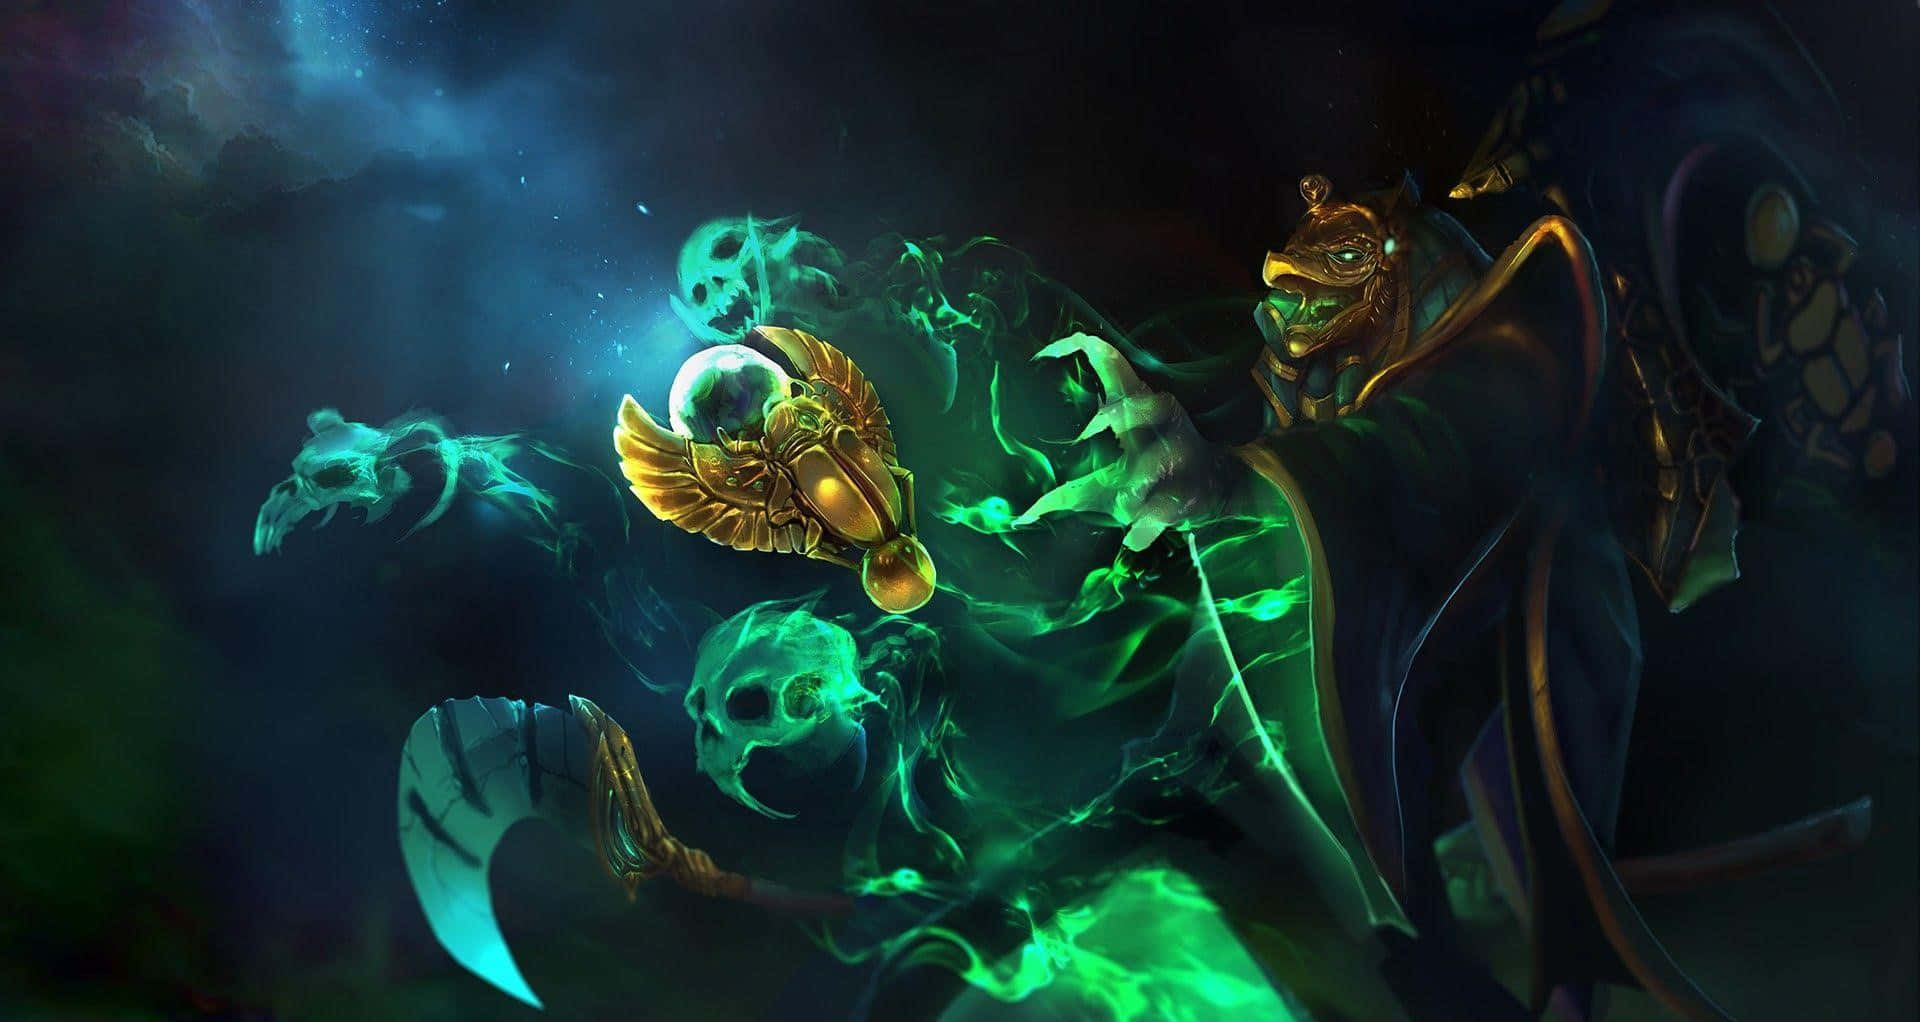 Mesmerizing Rubick the Grand Magus in action Wallpaper